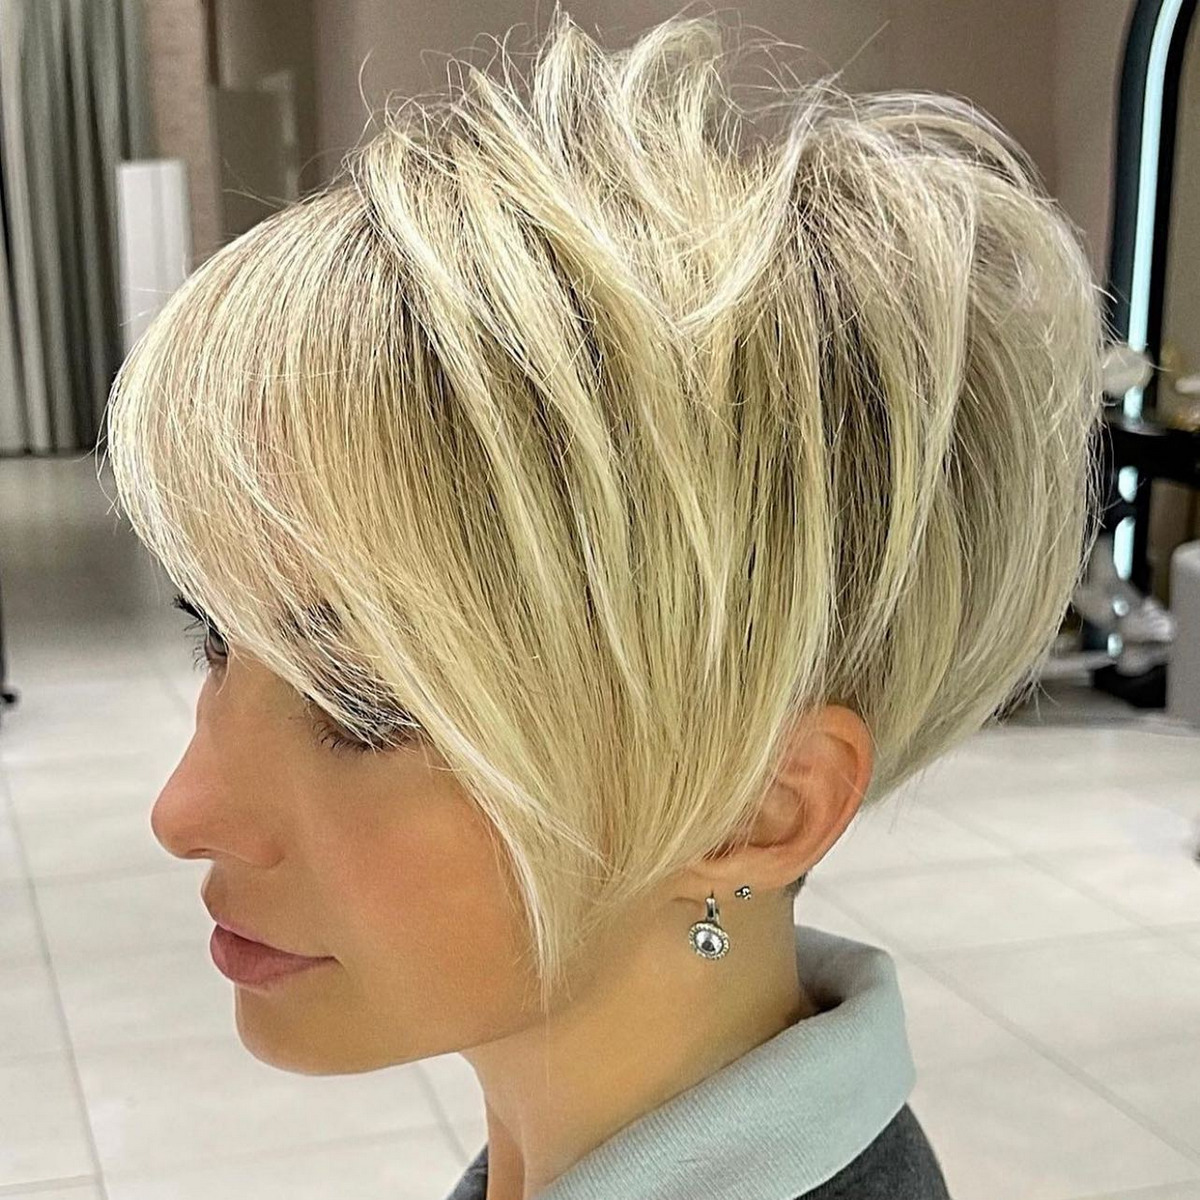 Pixie Cut With Choppy Layers